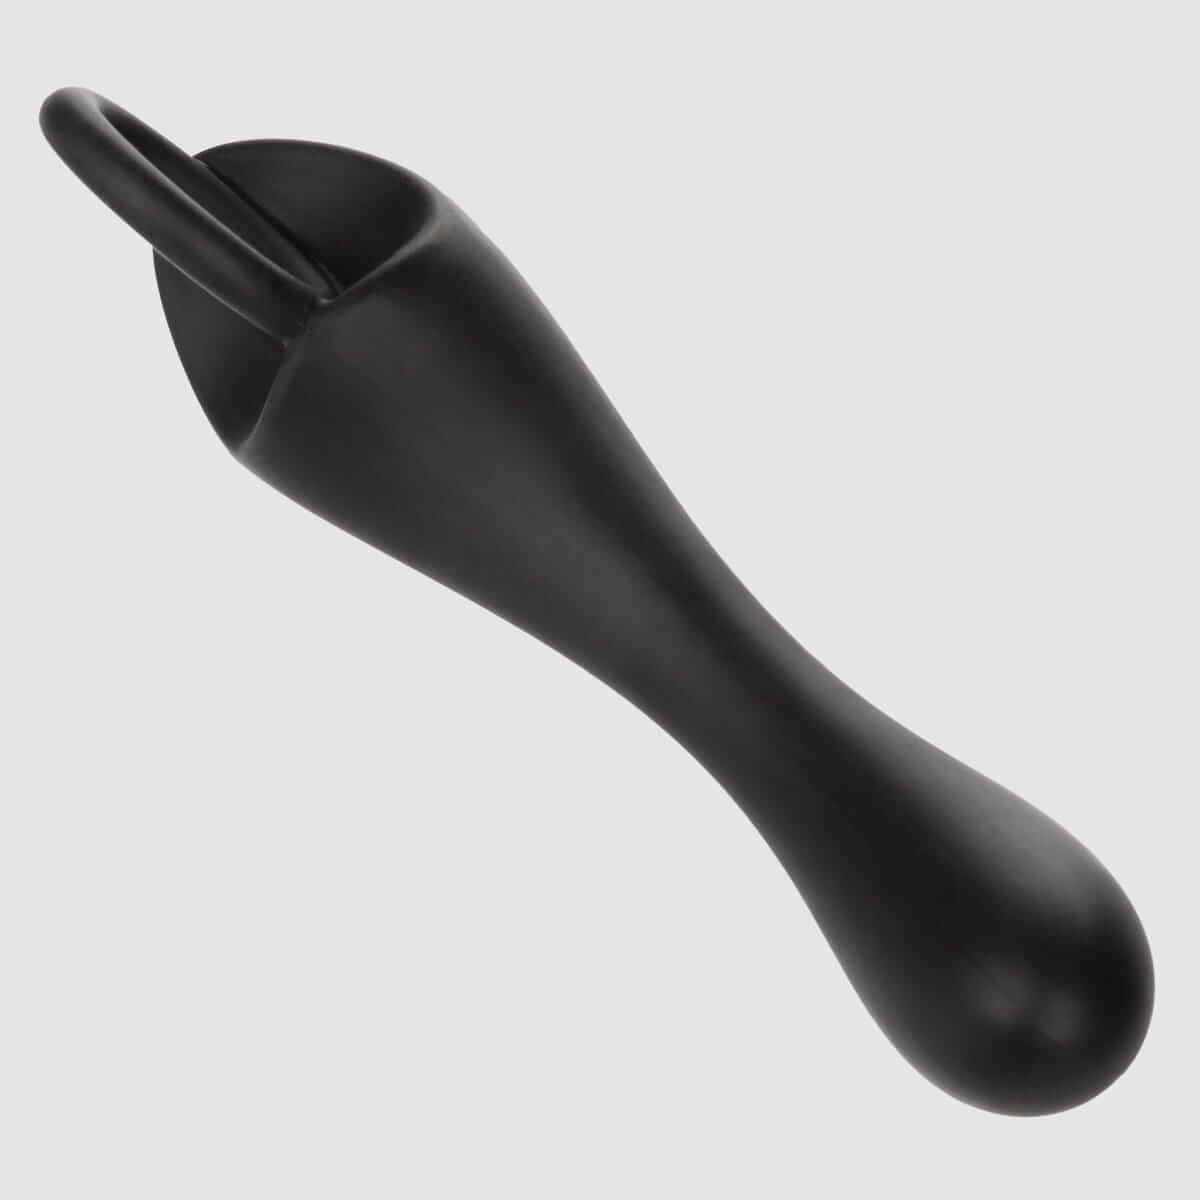 Dr. Joel Kaplan Silicone Prostate Locater - Thorn & Feather Sex Toy Canada